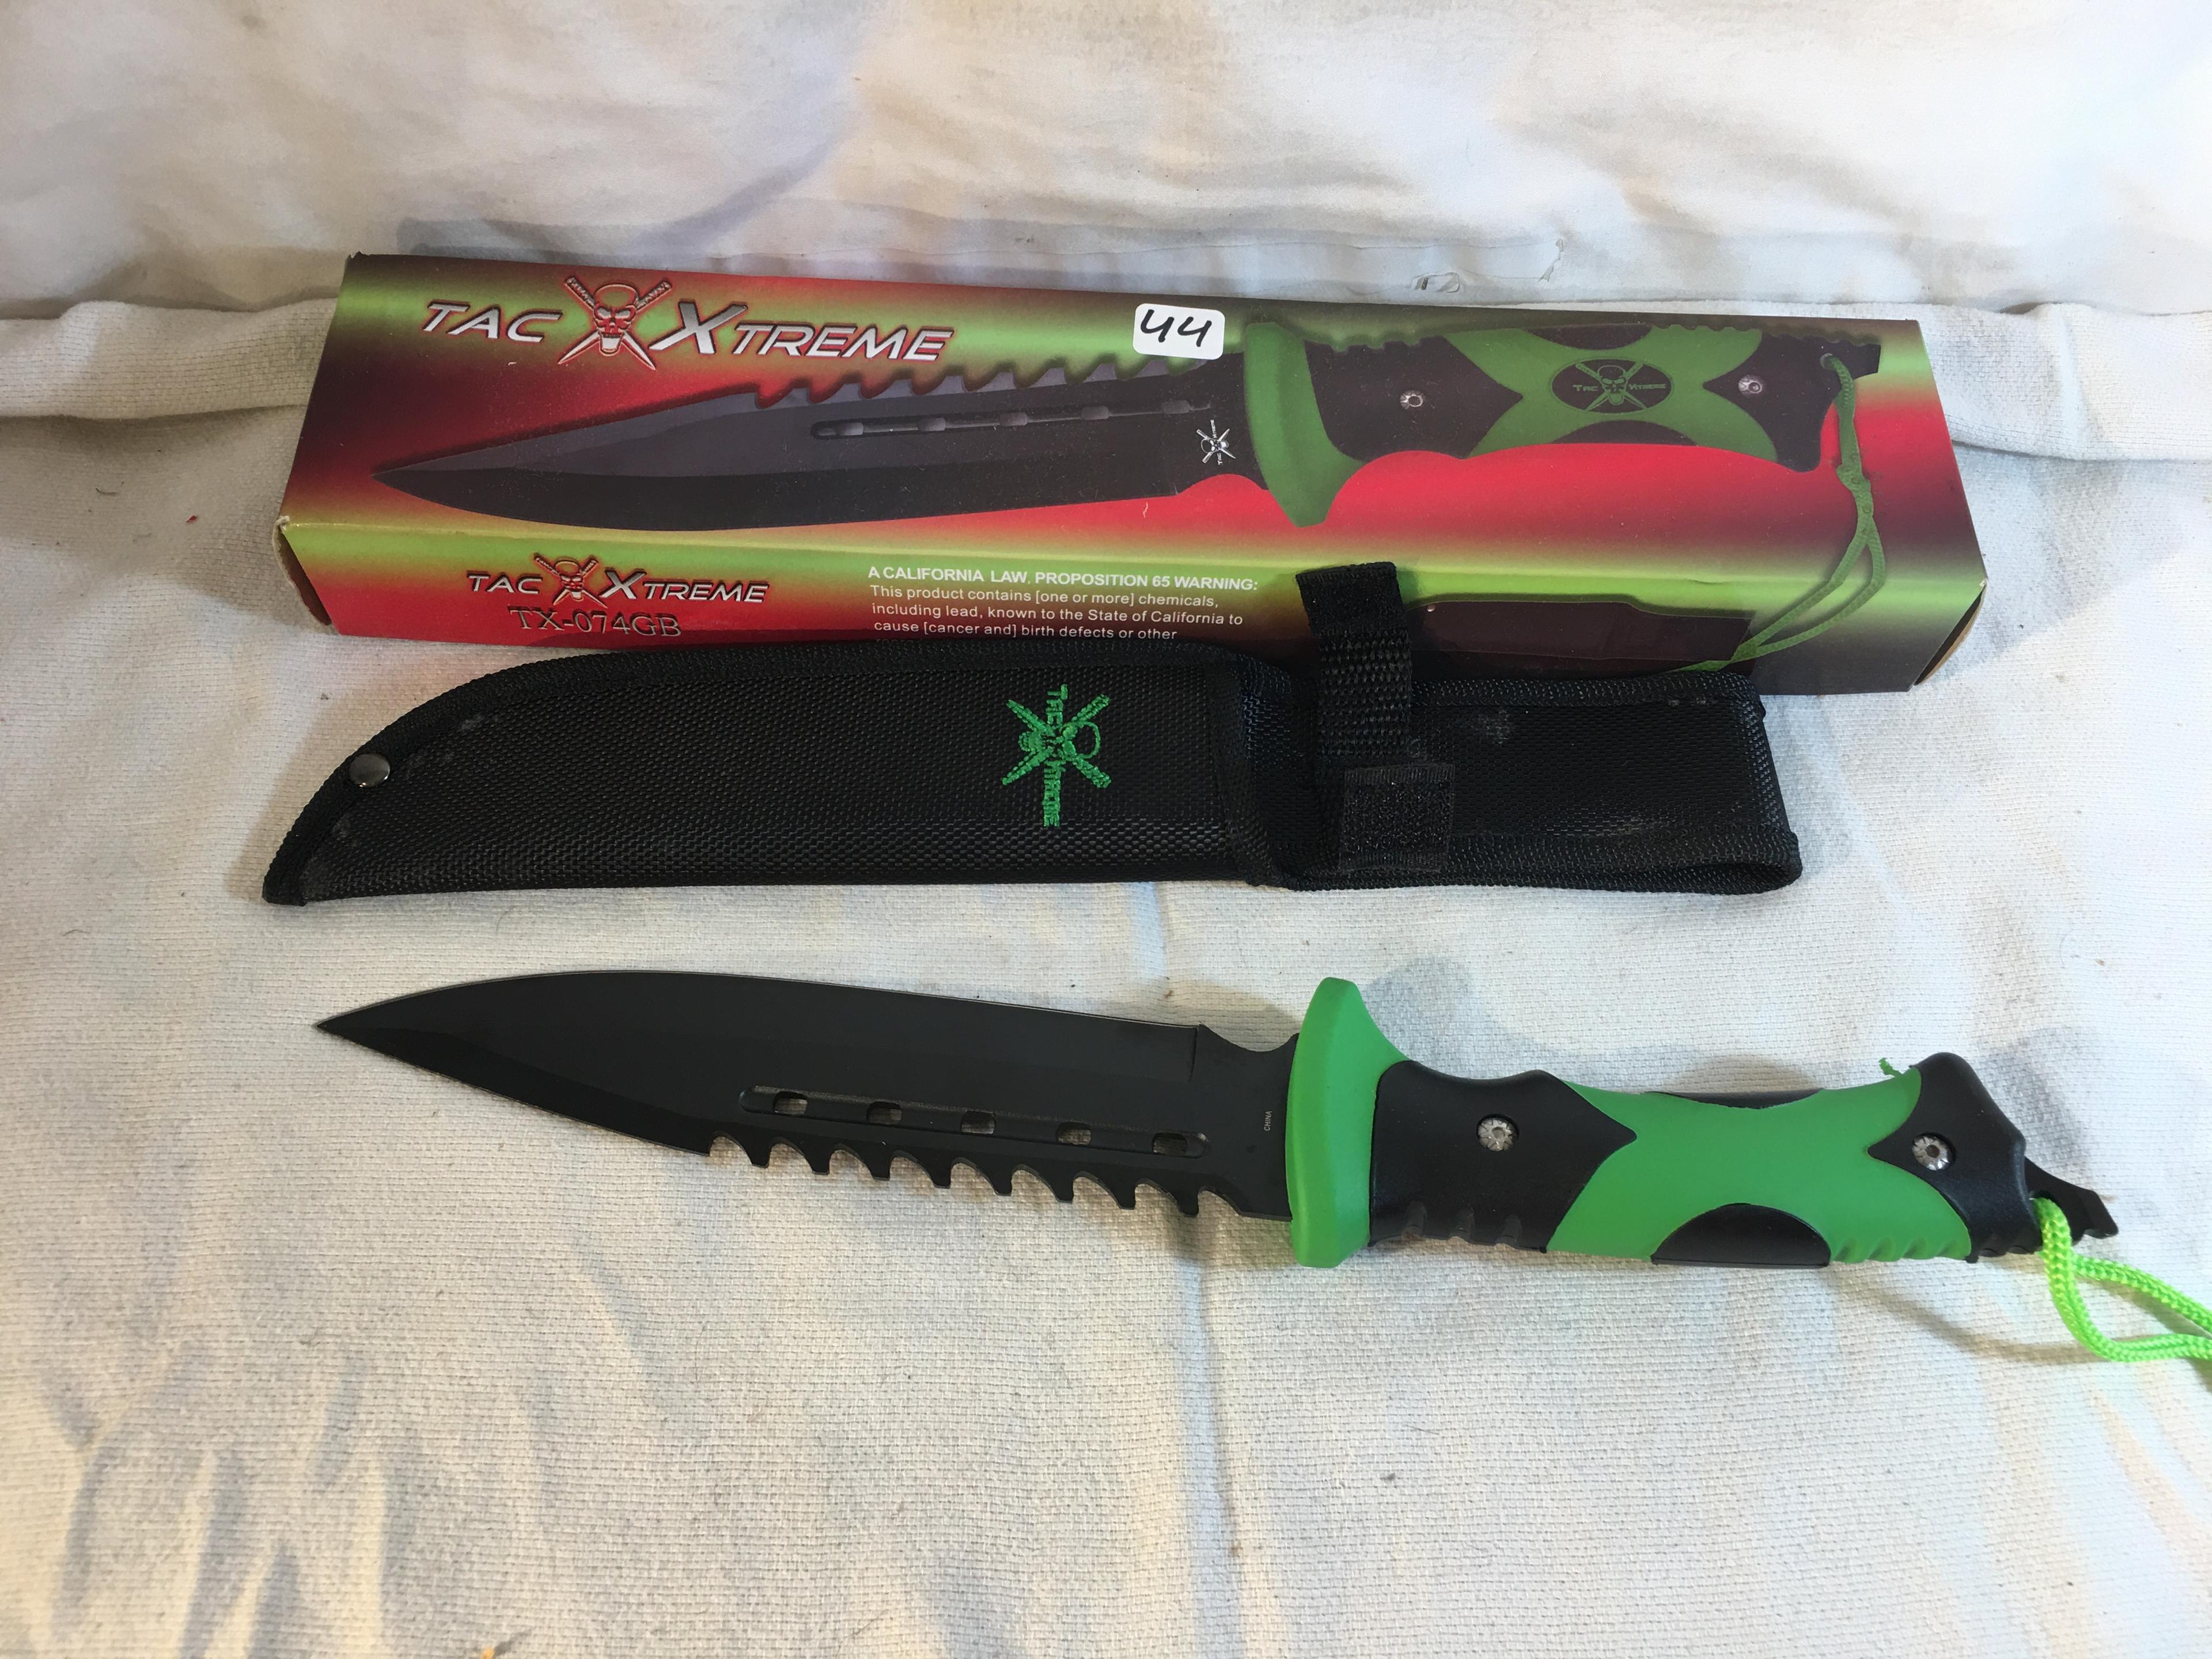 Colletcor New Tac Xtreme Knife 12" Overall Black Blade 3.5mm Thickness Green & Black Knive